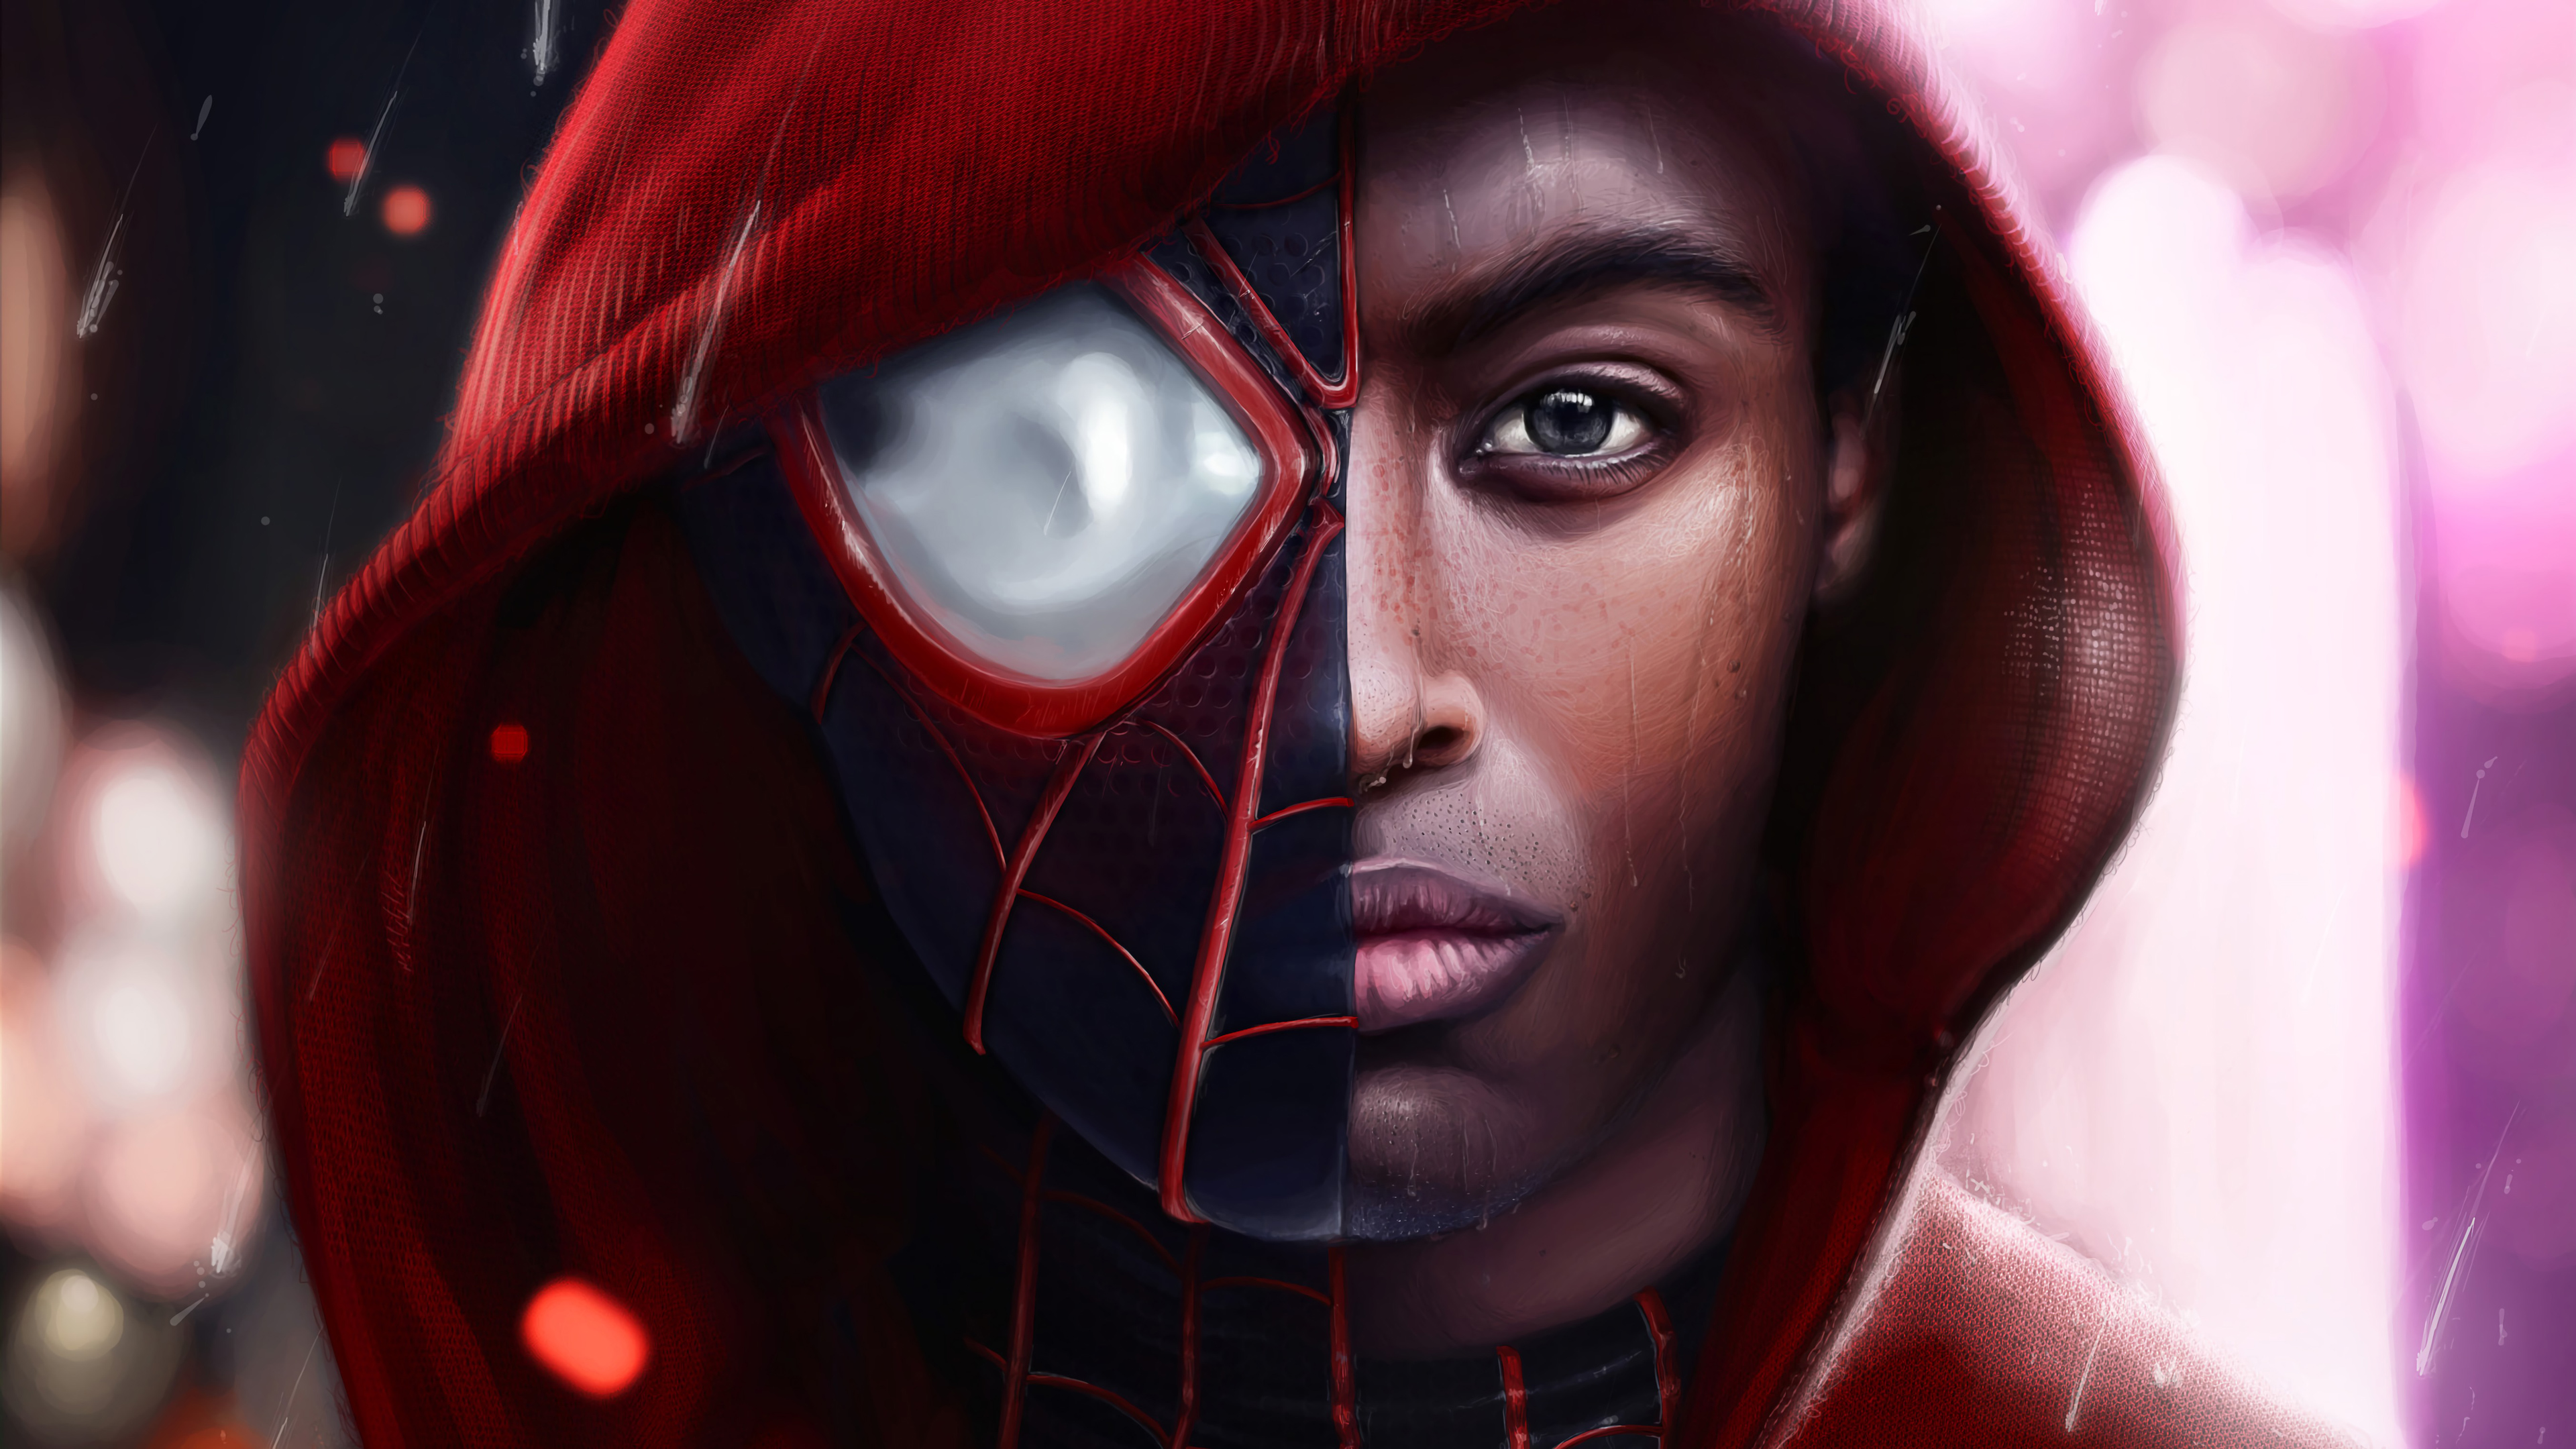 Spider-Man: Into The Spider-Verse 4k Ultra HD Wallpaper by mirkostoedter